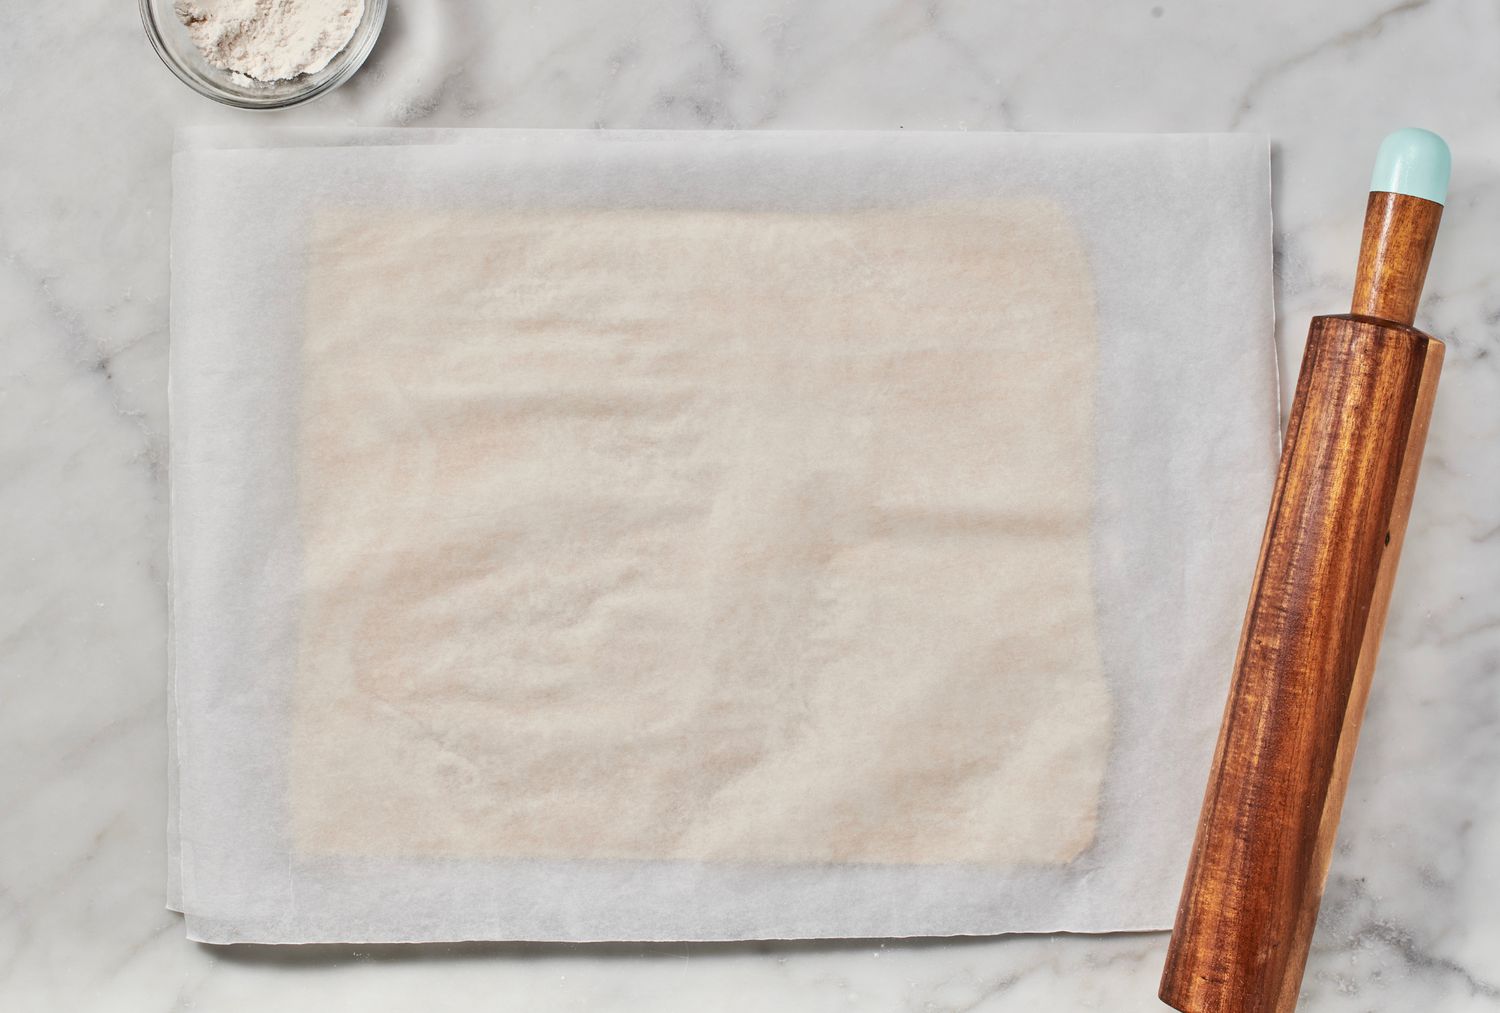 A large, rectangular sheet of puff pastry on parchment paper